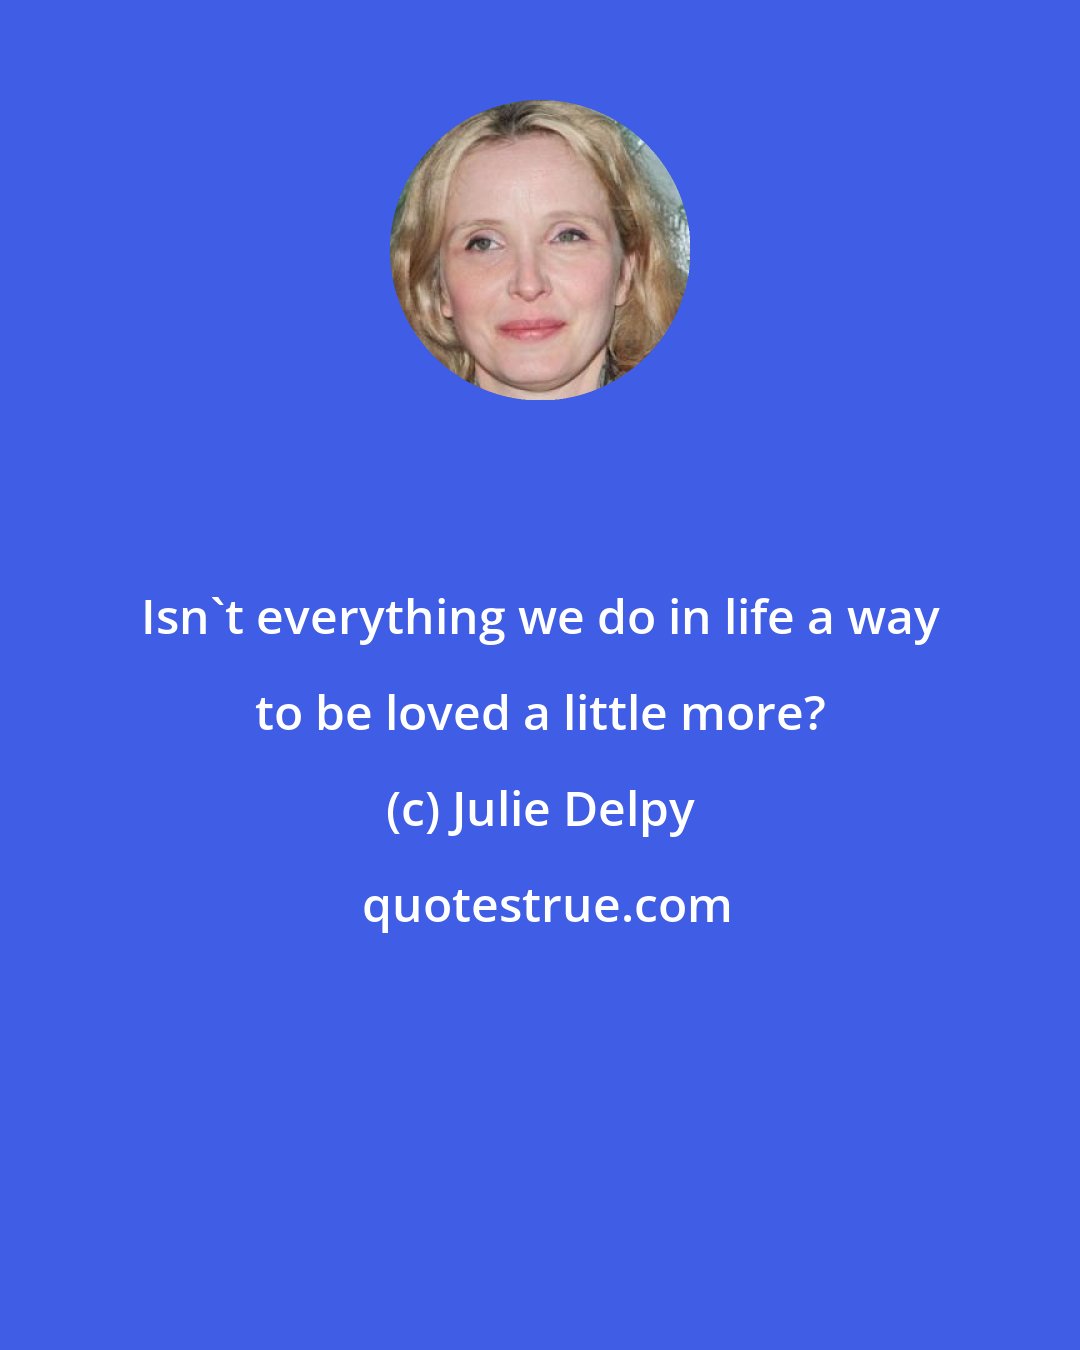 Julie Delpy: Isn't everything we do in life a way to be loved a little more?